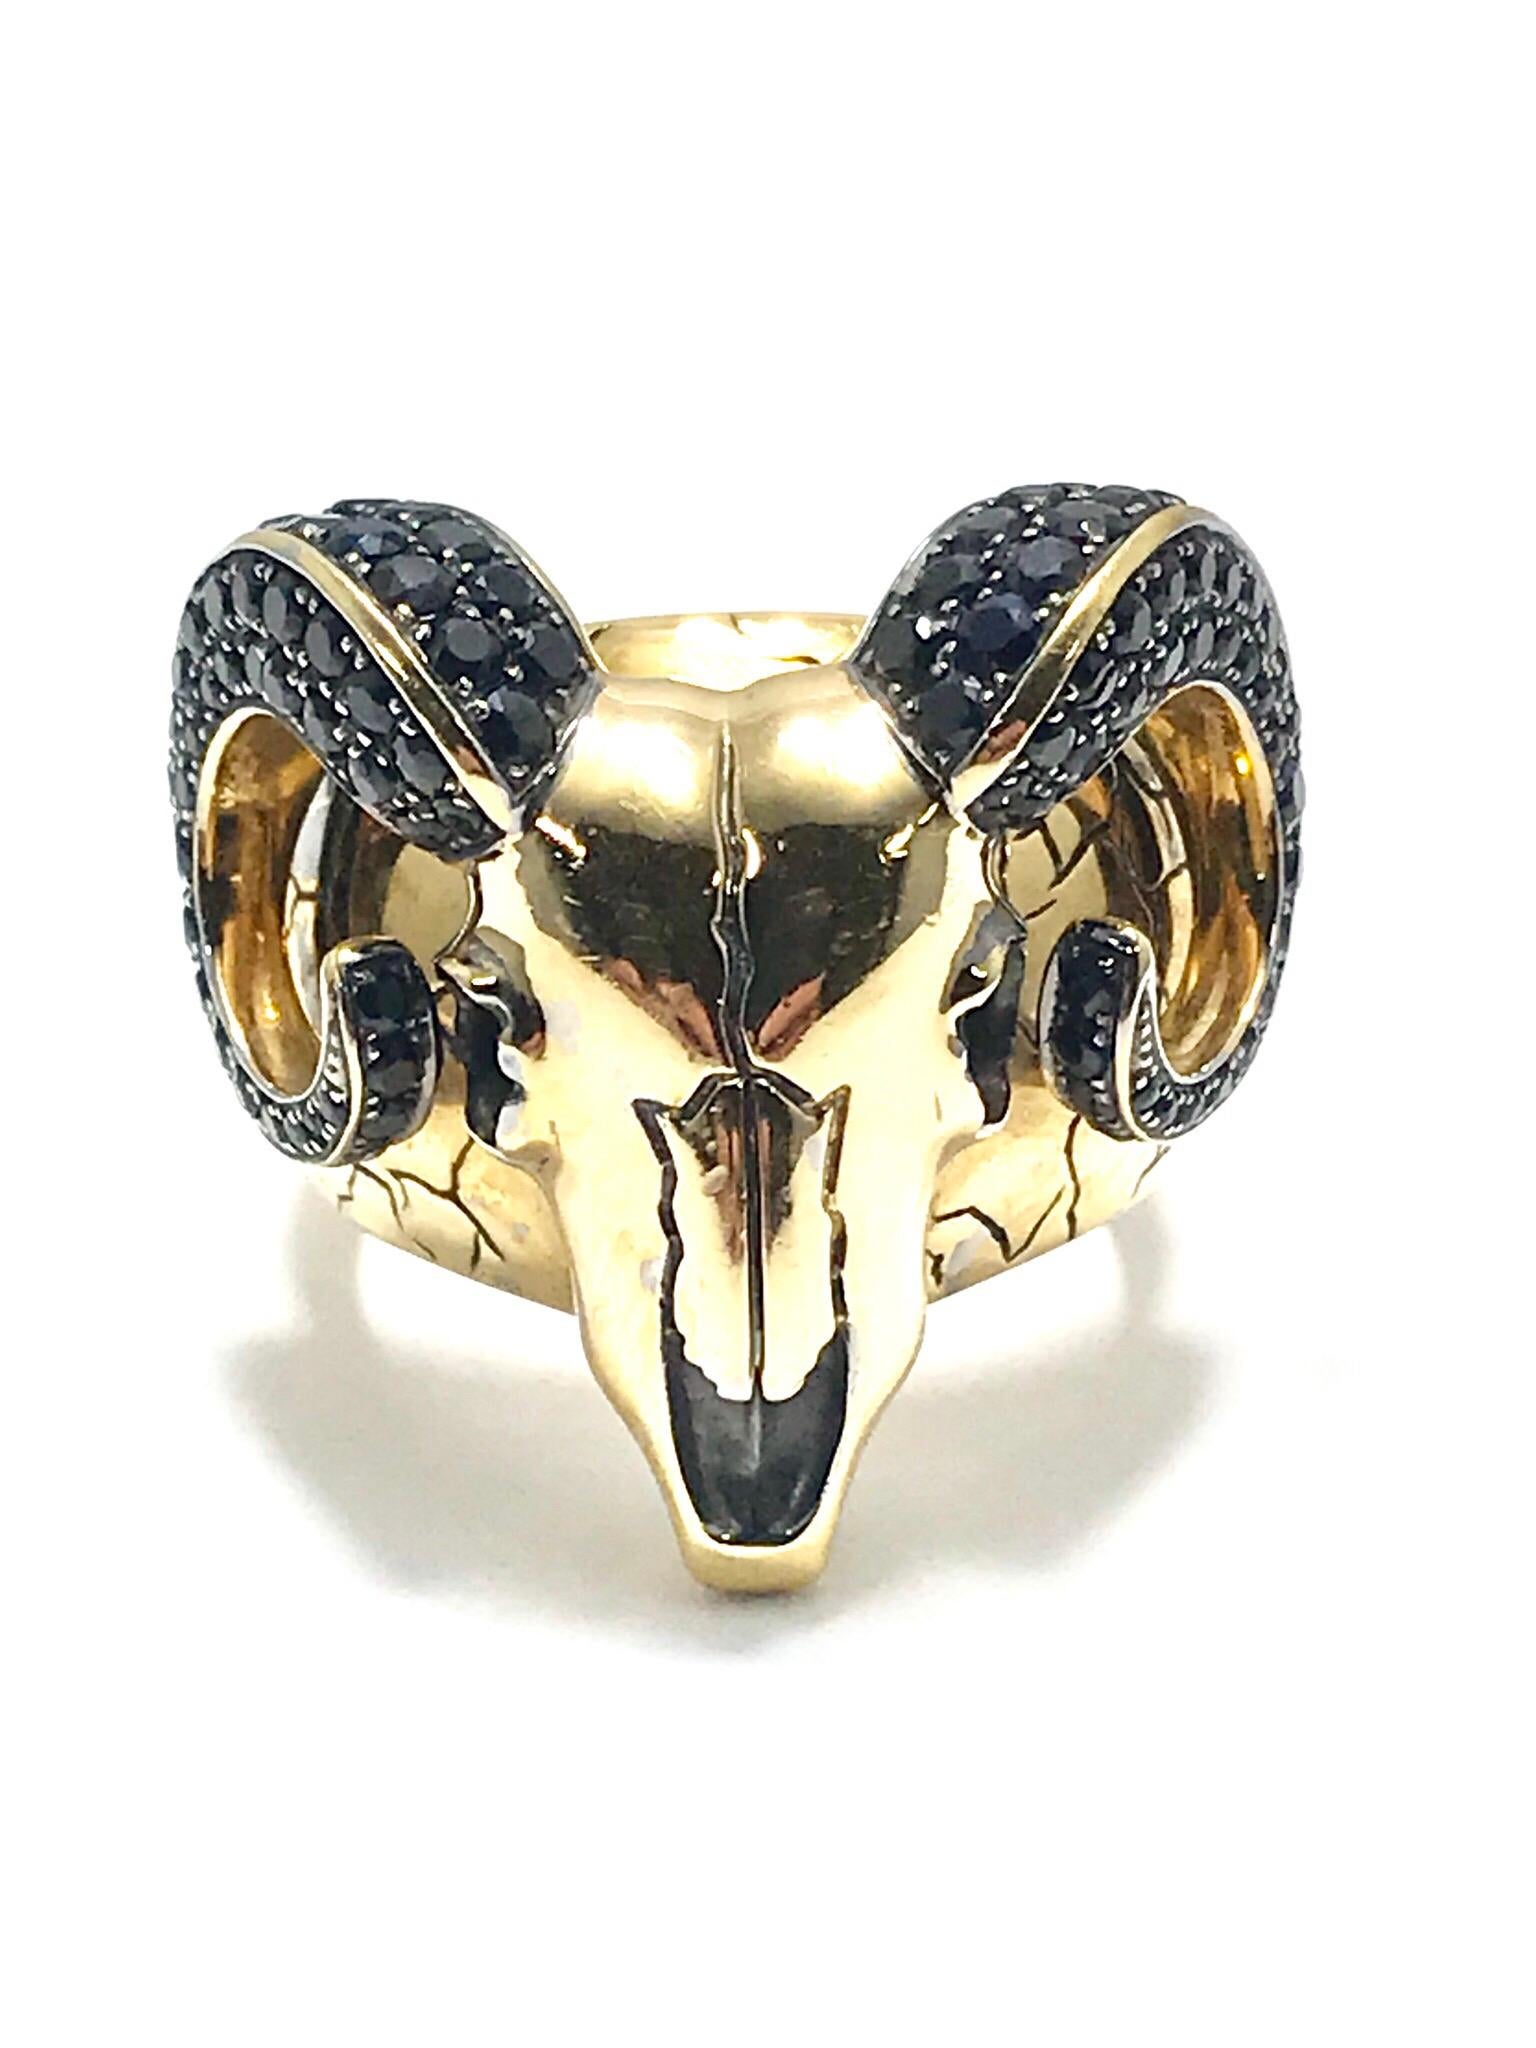 A unique Stephen Webster Black Sapphire and 18 karat yellow gold ram's skull ring.  Created with intricate detail, having the round faceted black sapphires set in the ram's horns, and an etched pattern on the tapering shank.  The horns contain 2.25